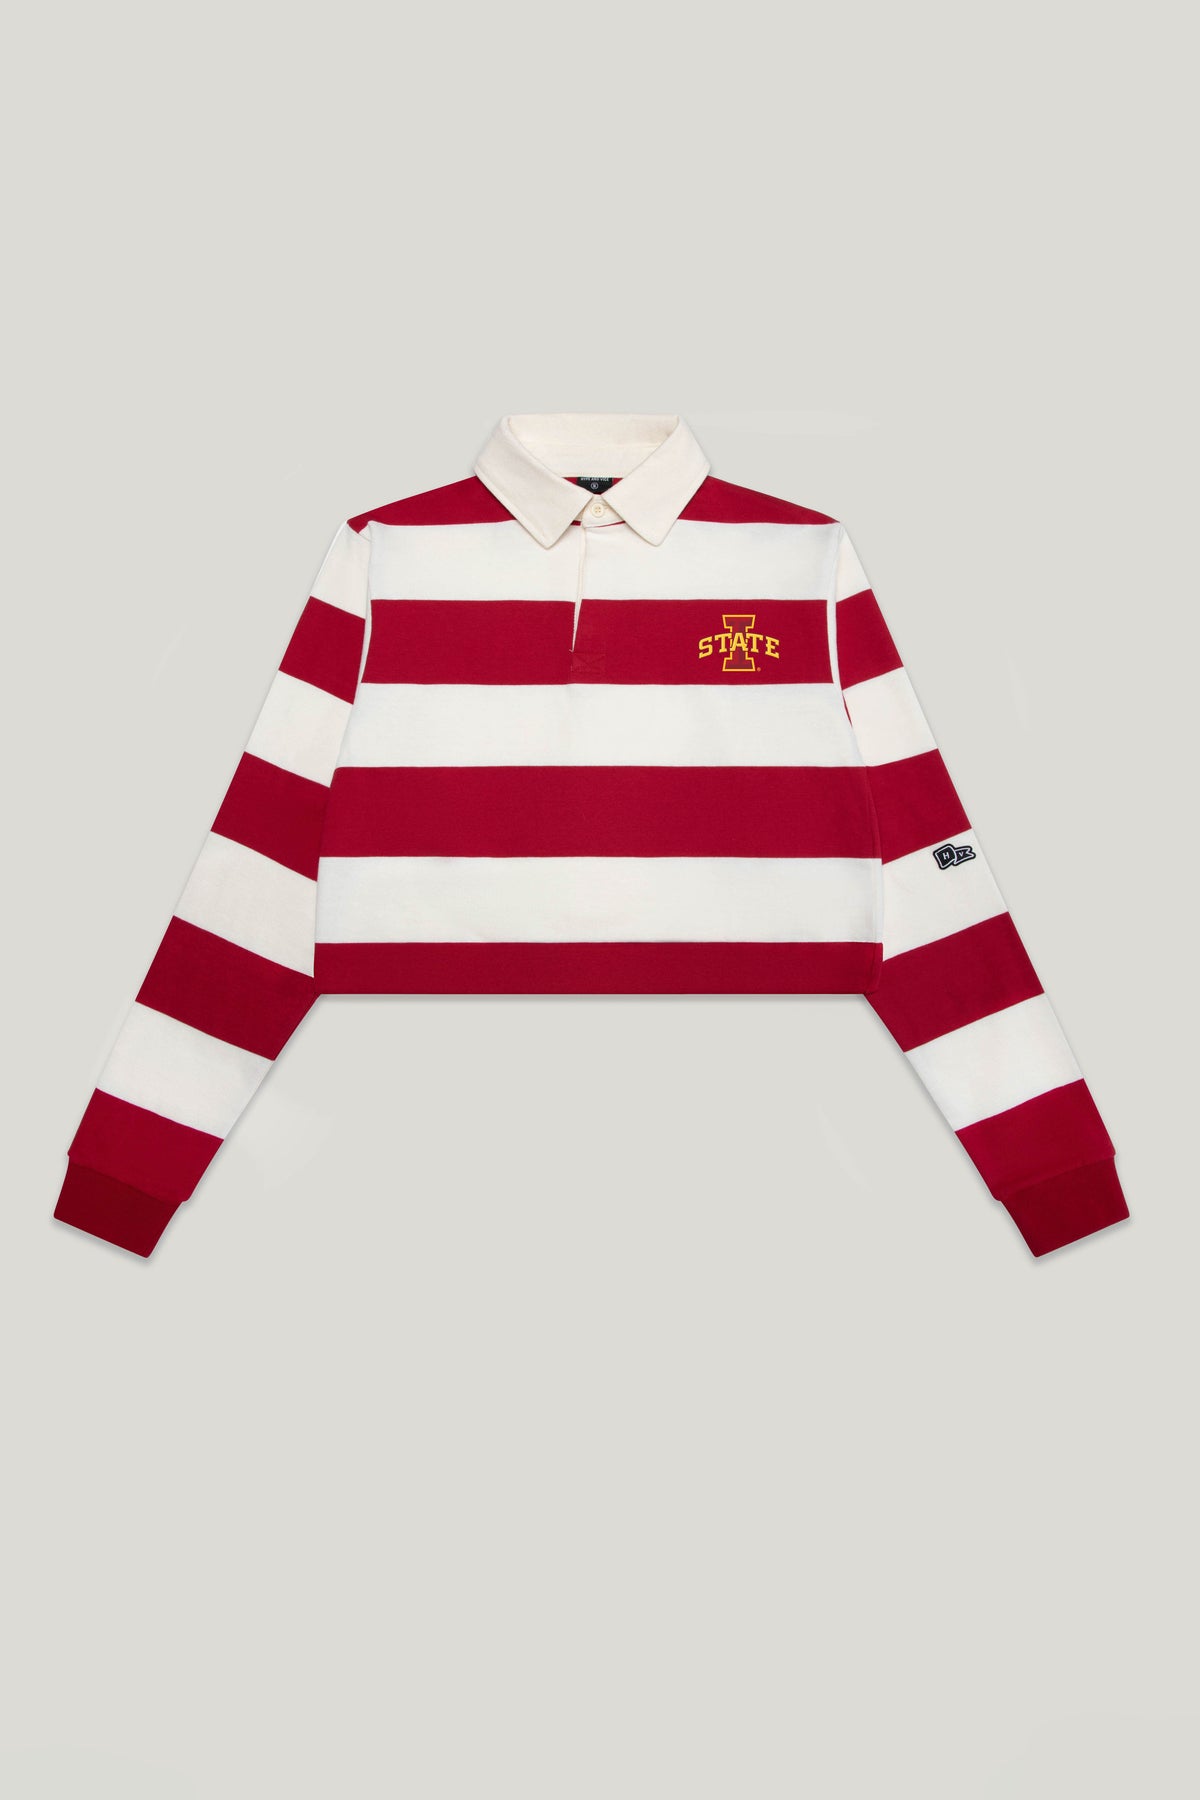 Iowa State Rugby Top